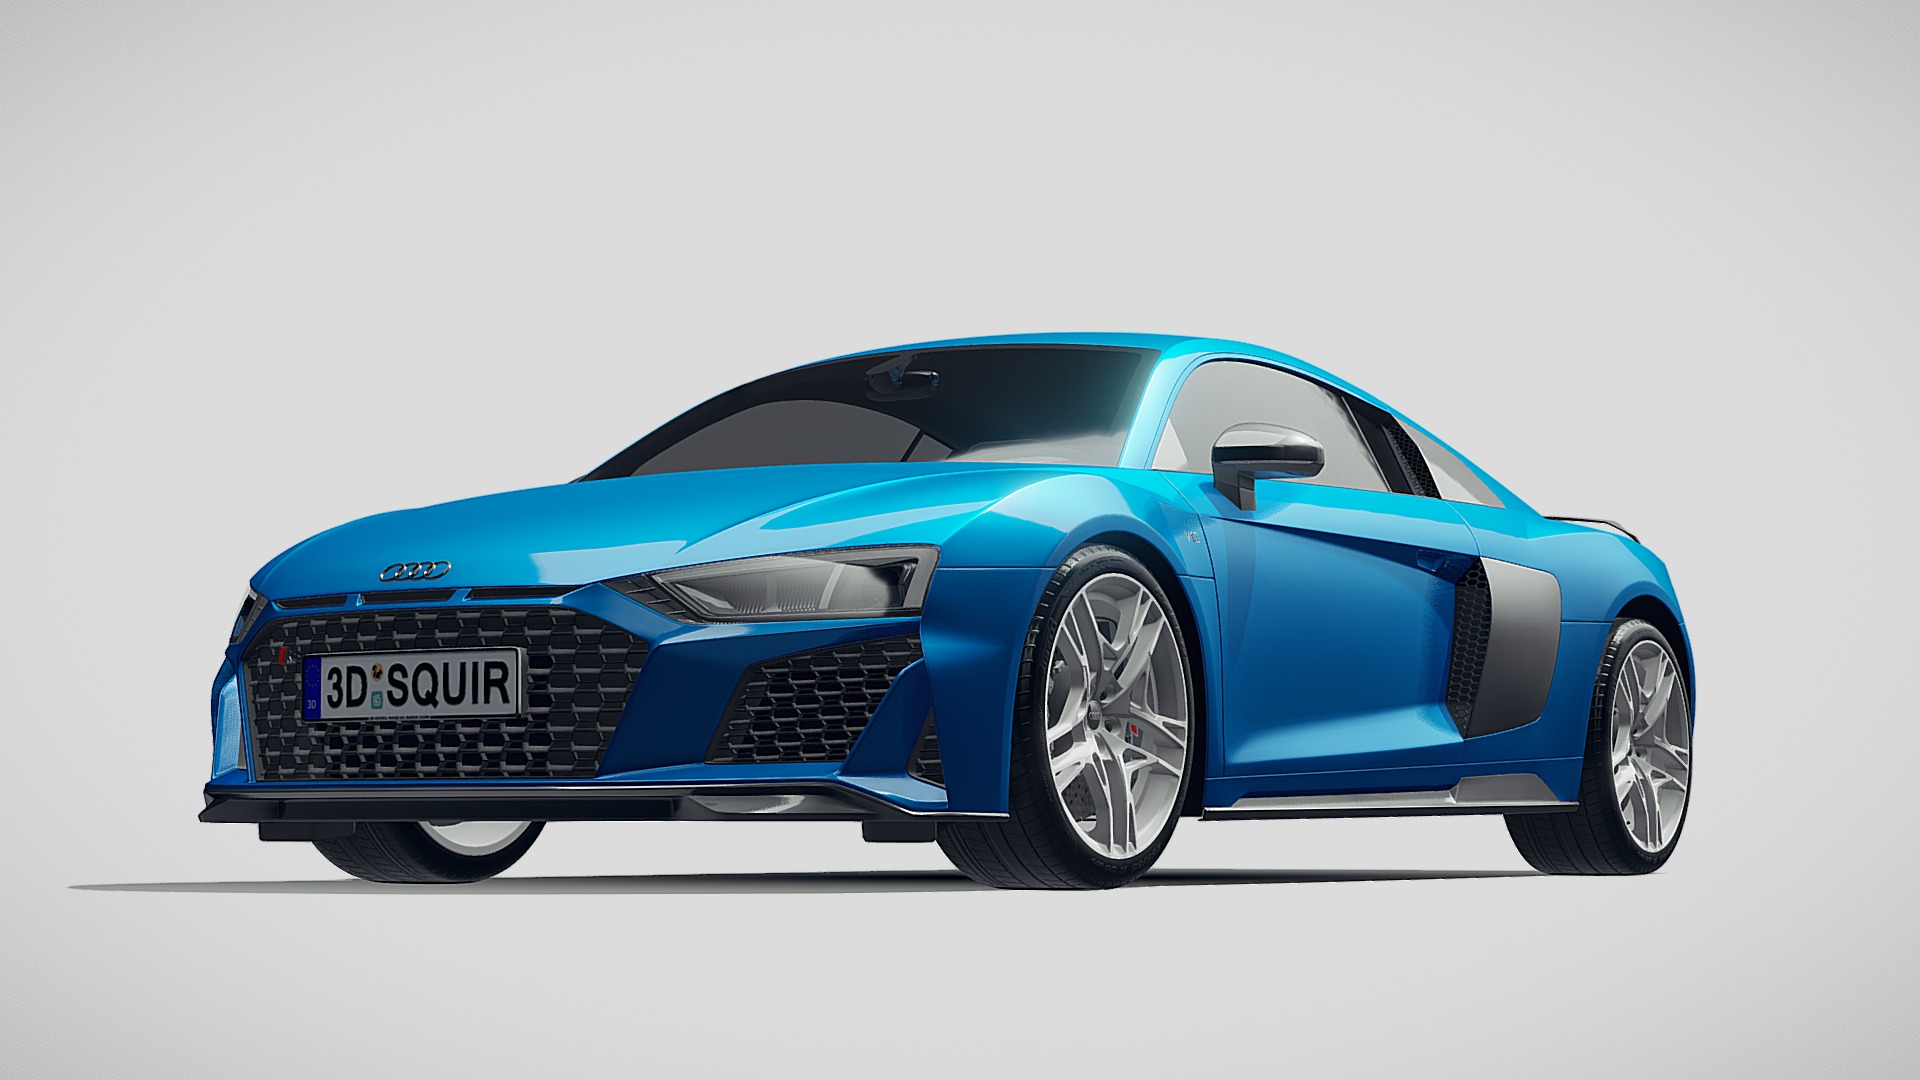 3D model Audi R8 2019 - This is a 3D model of the Audi R8 2019. The 3D model is about a blue sports car.